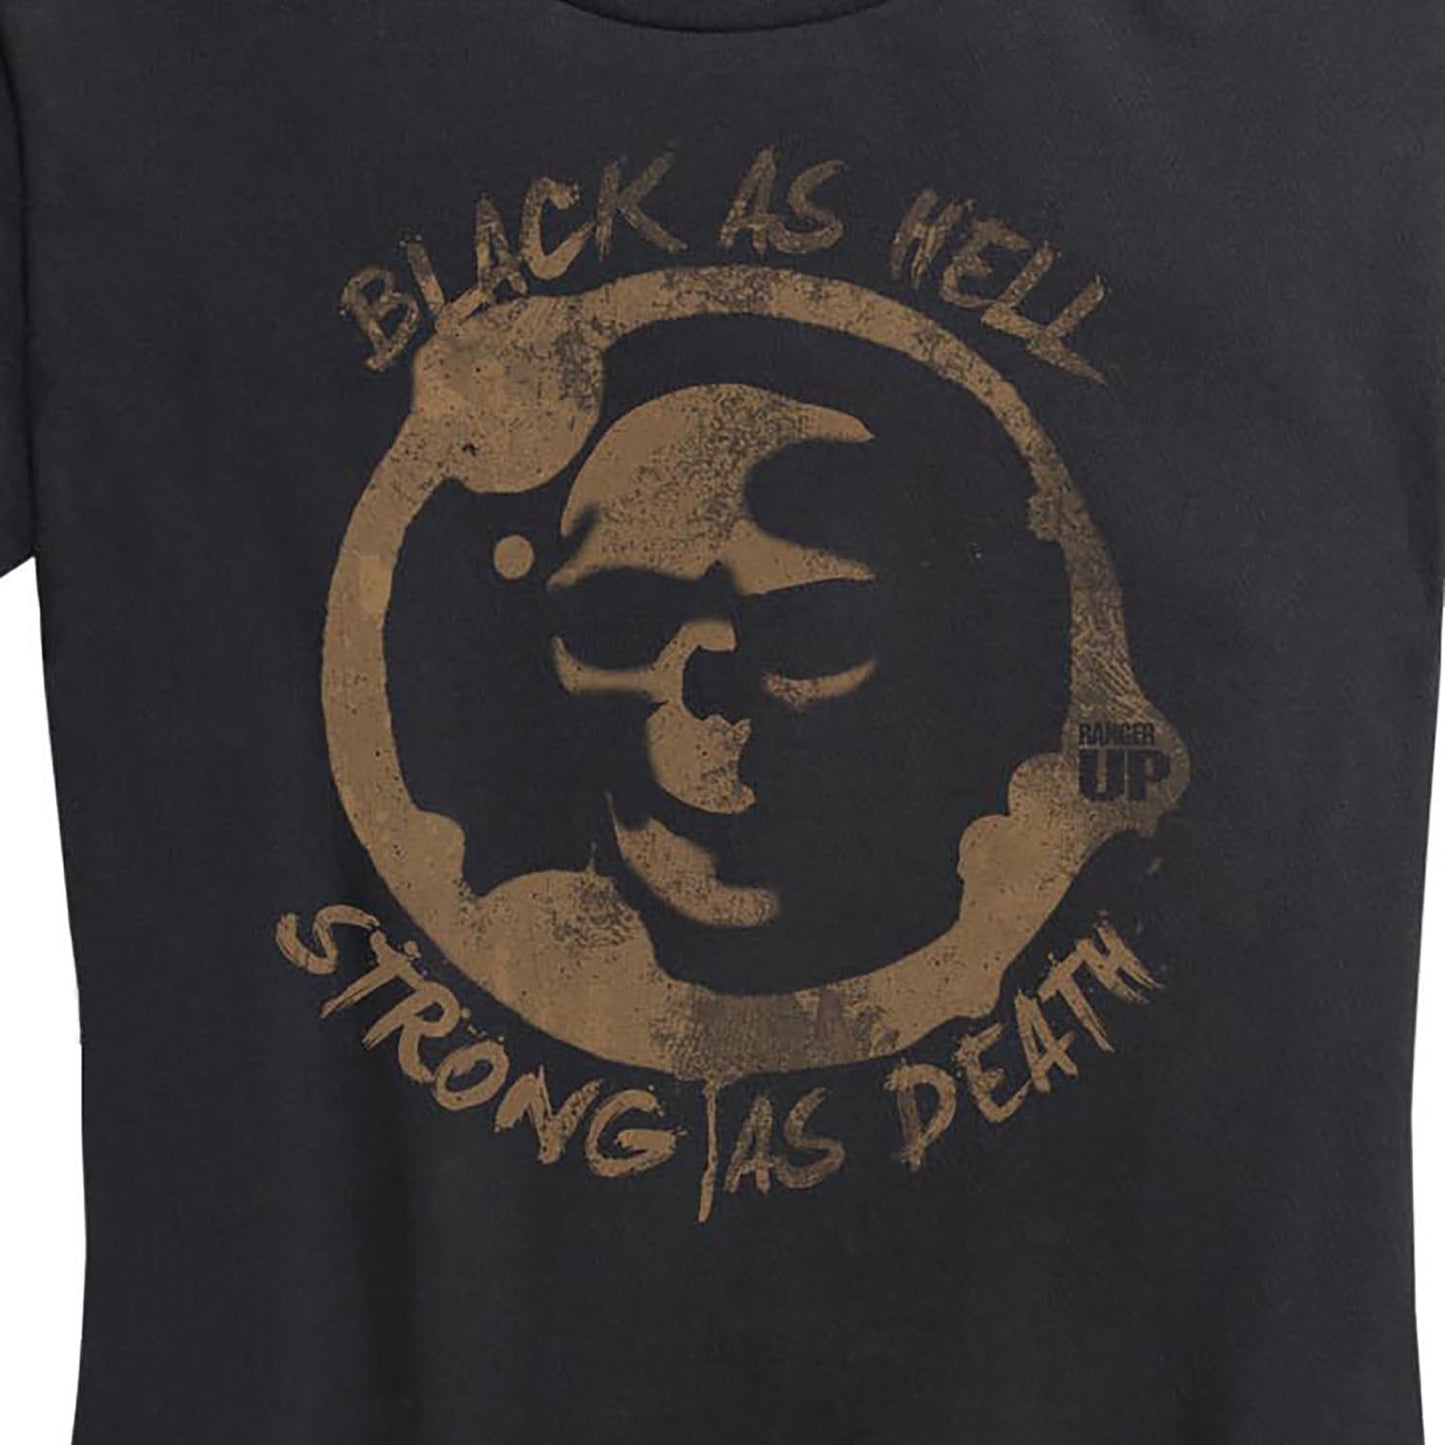 Women's Strong As Death Tee